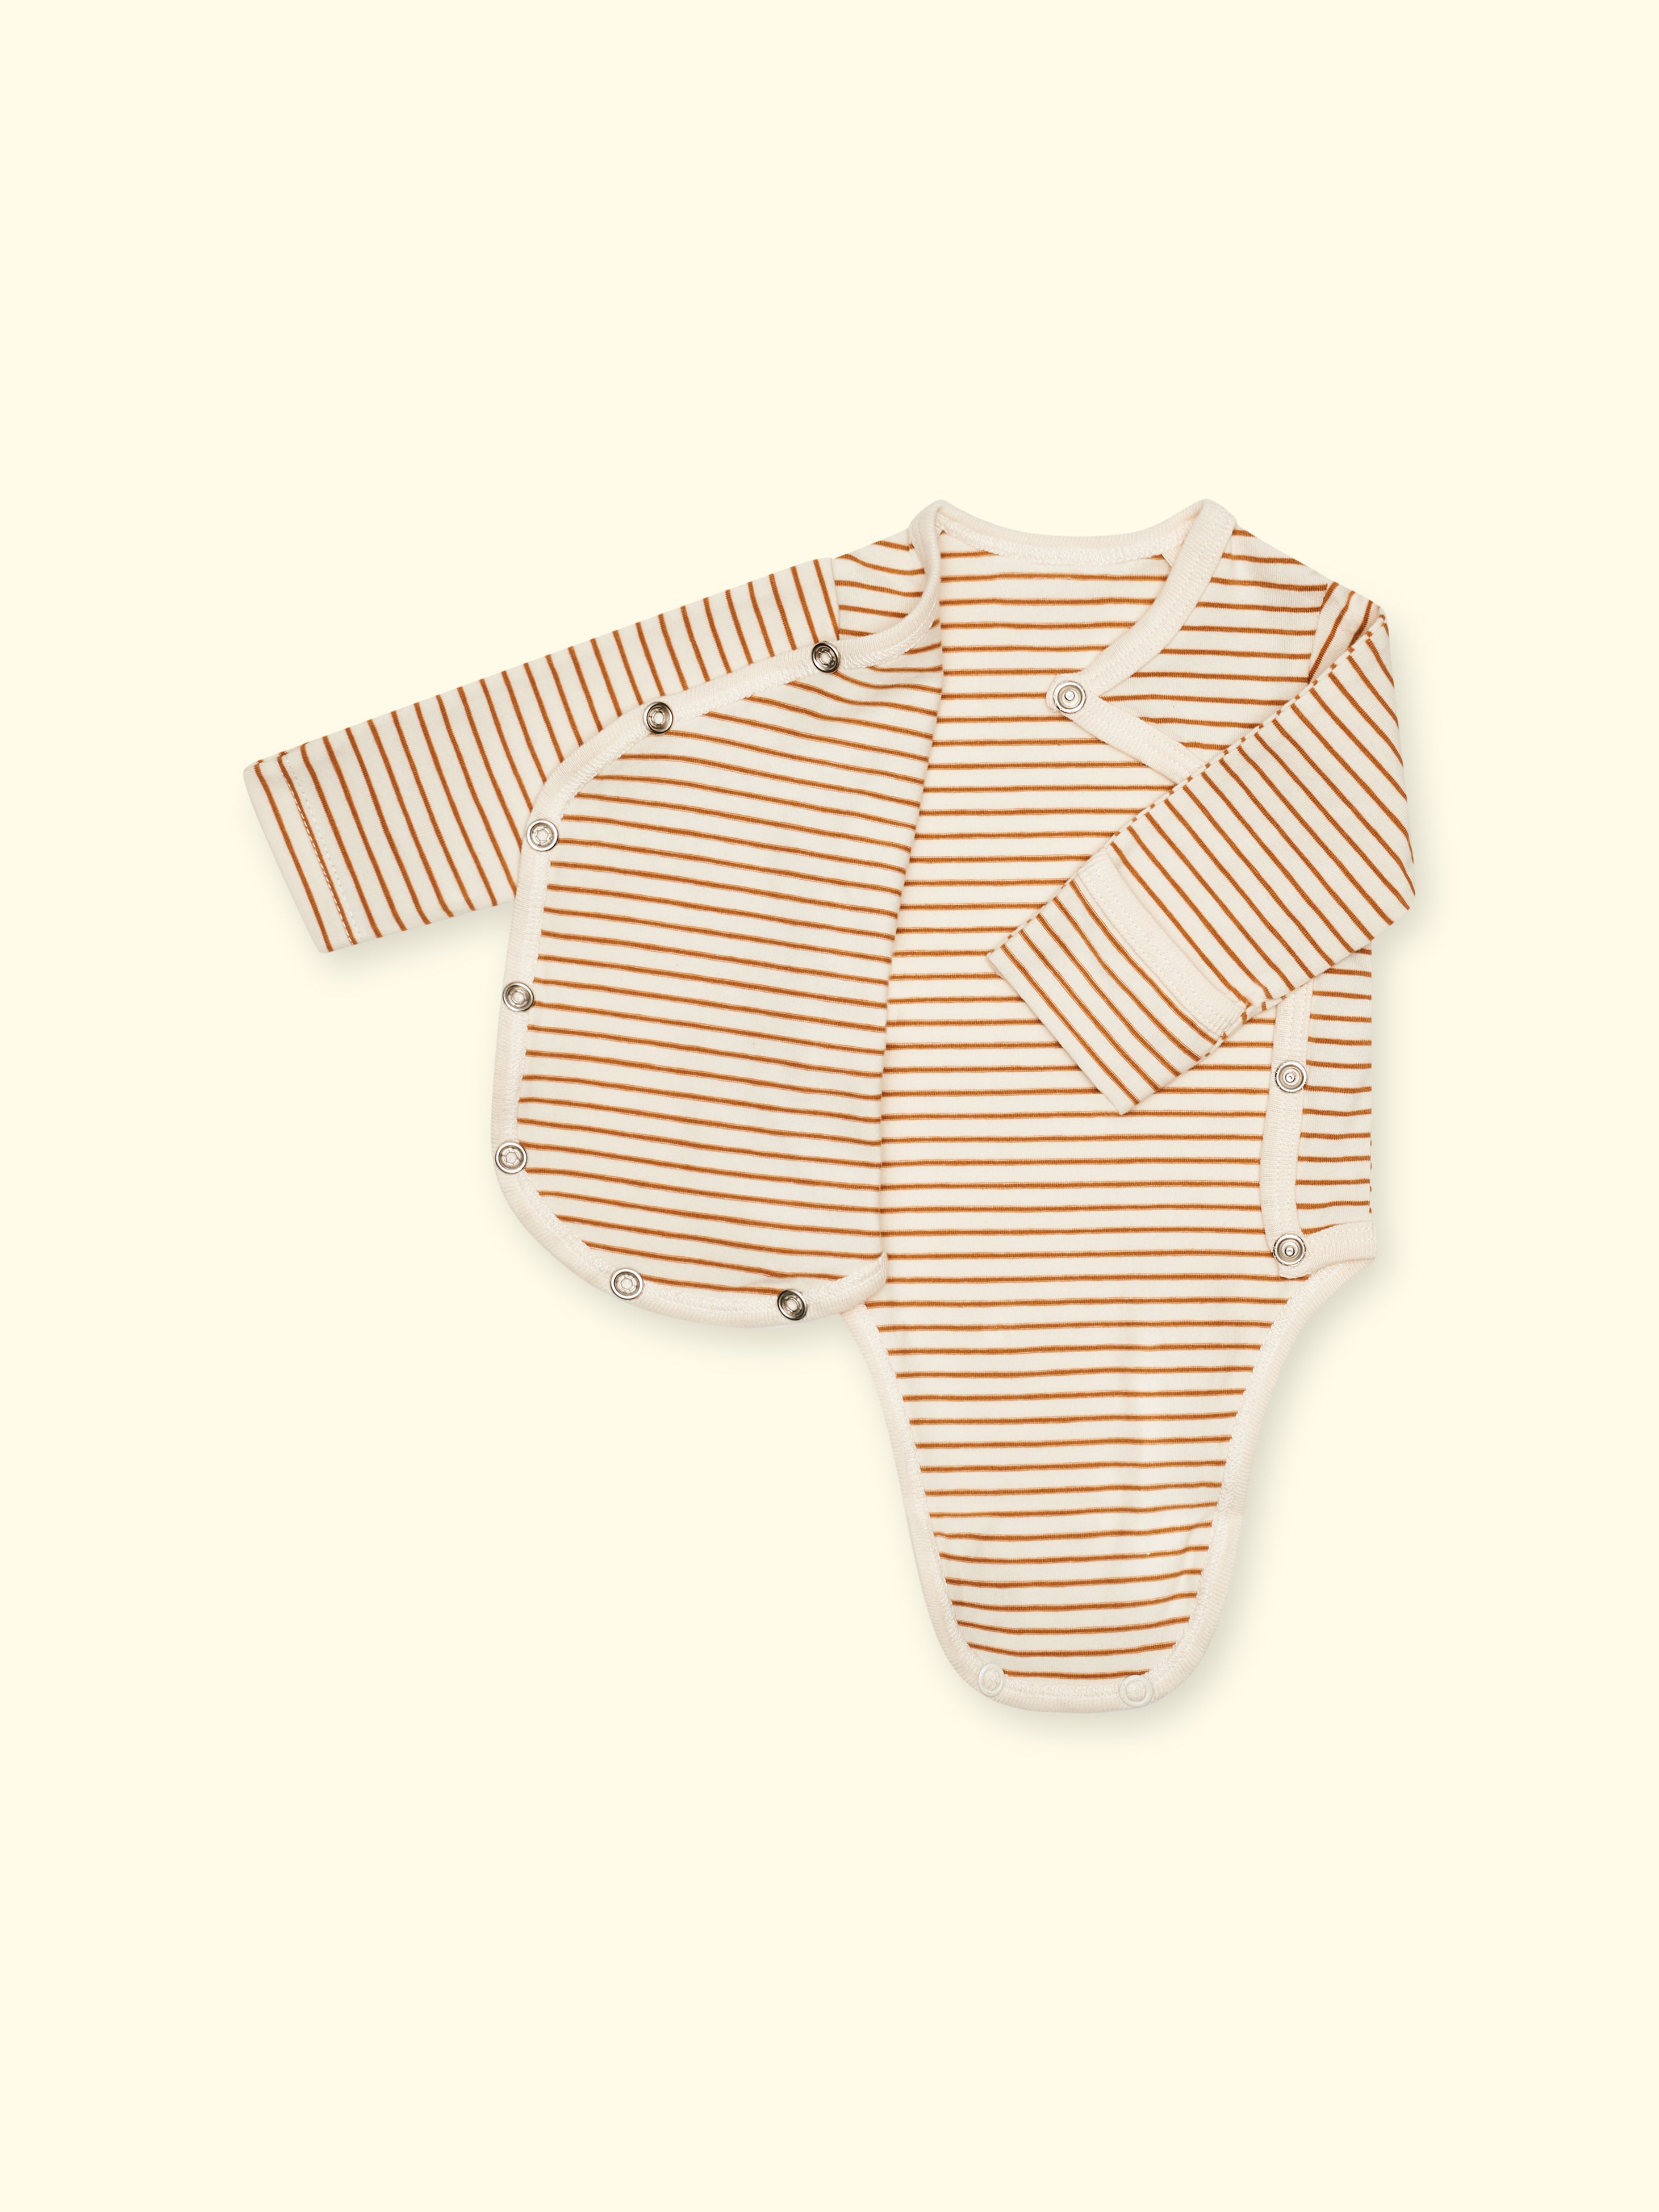 Adaptive bodysuit with scratch protection for premature babies and babies - cream/striped